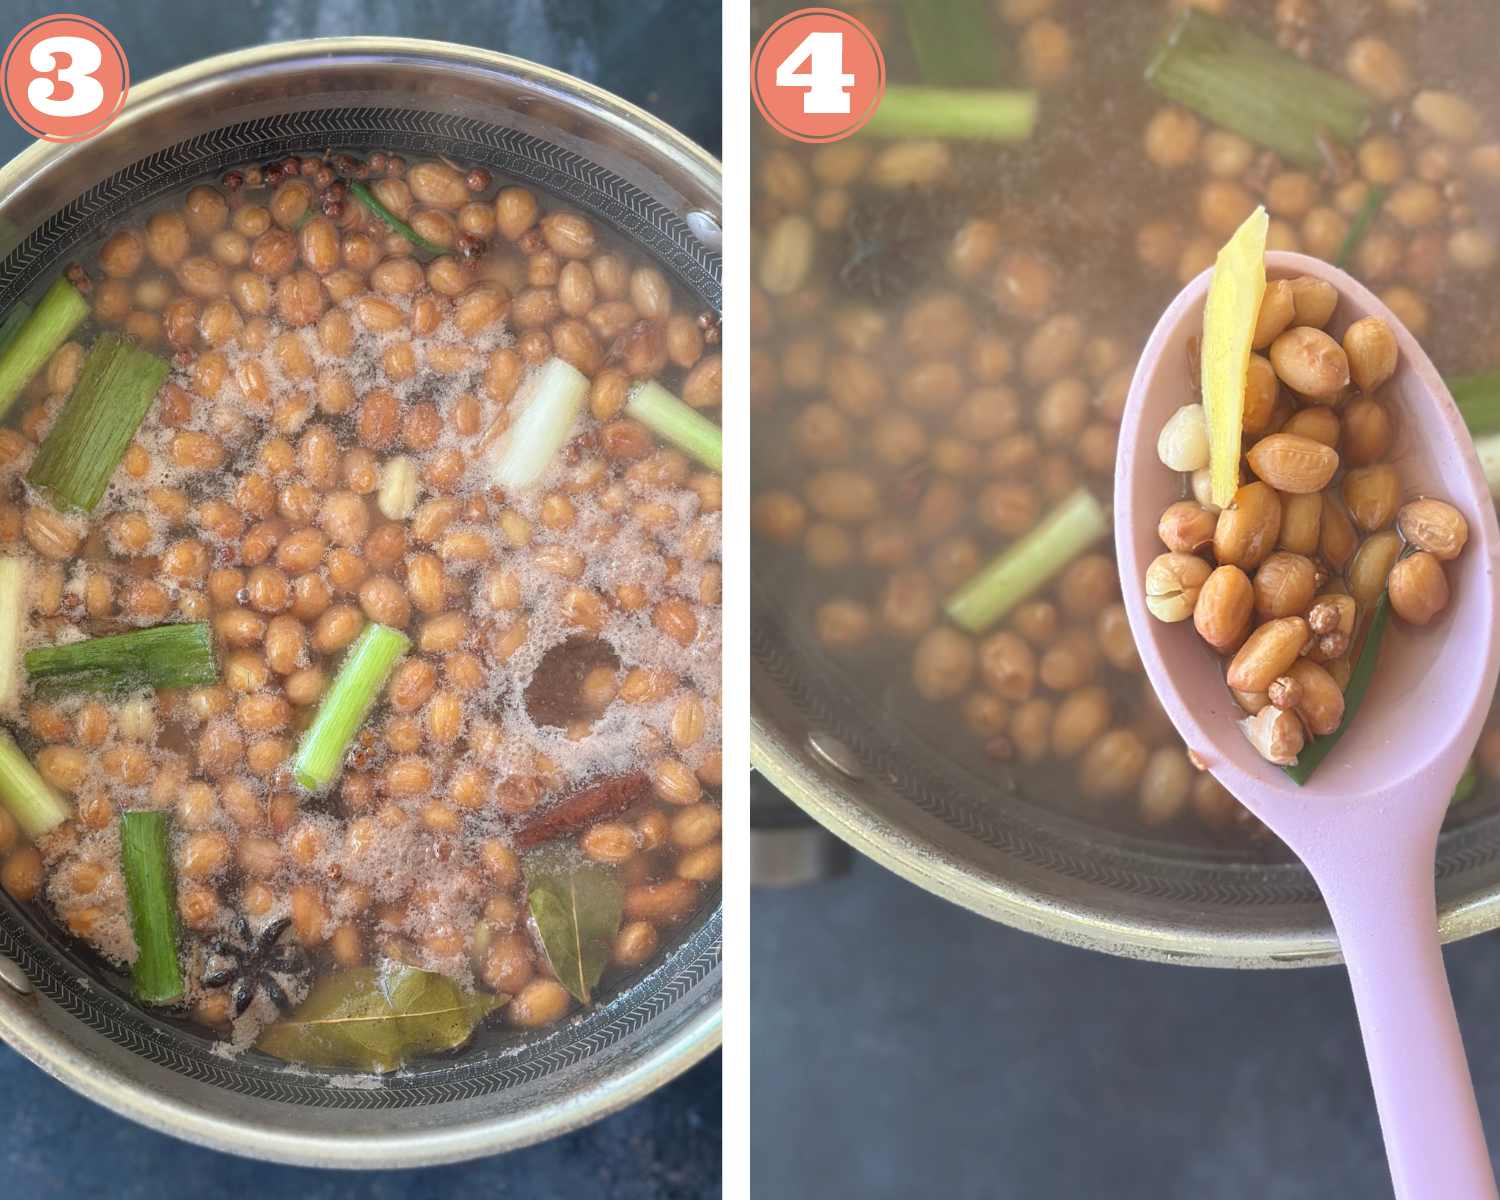 Collage steps for boiling peanuts to make an Asian salad.